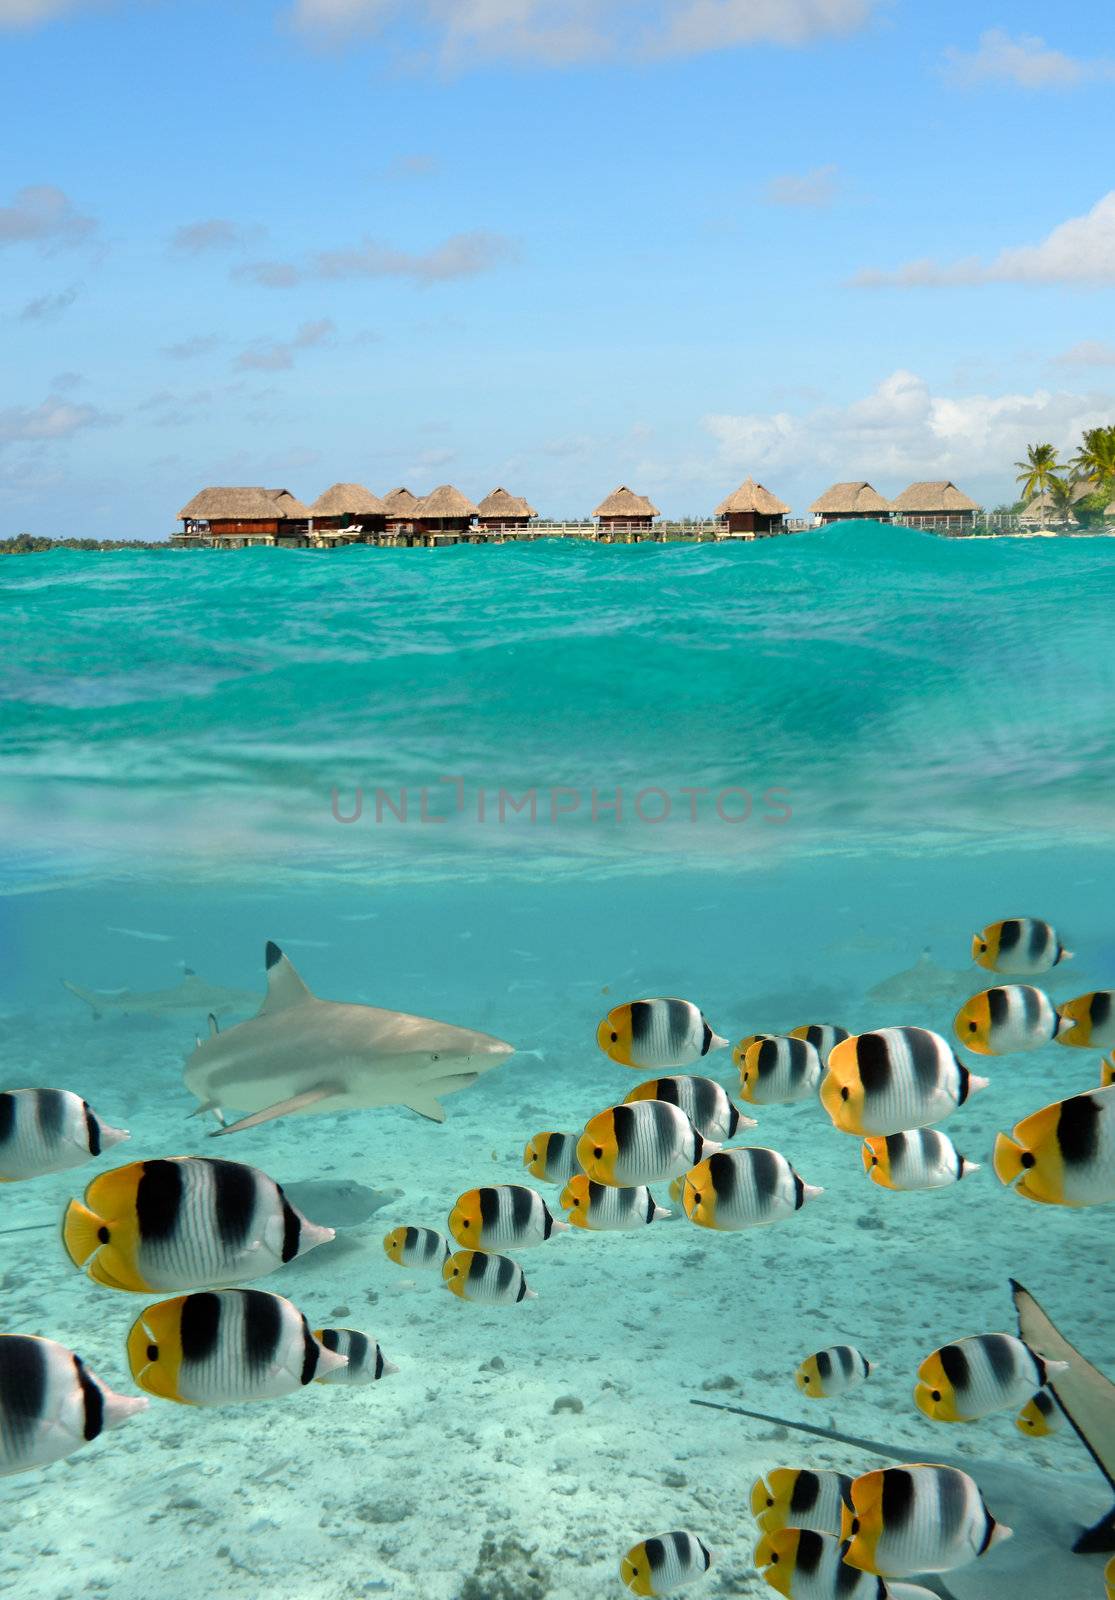 A blacktip reef shark chasing butterfly fish in the shallow, clear water of the lagoon of Bora Bora, an island in the Tahiti archipelago French Polynesia with a  overwater bungalow resort in the background.